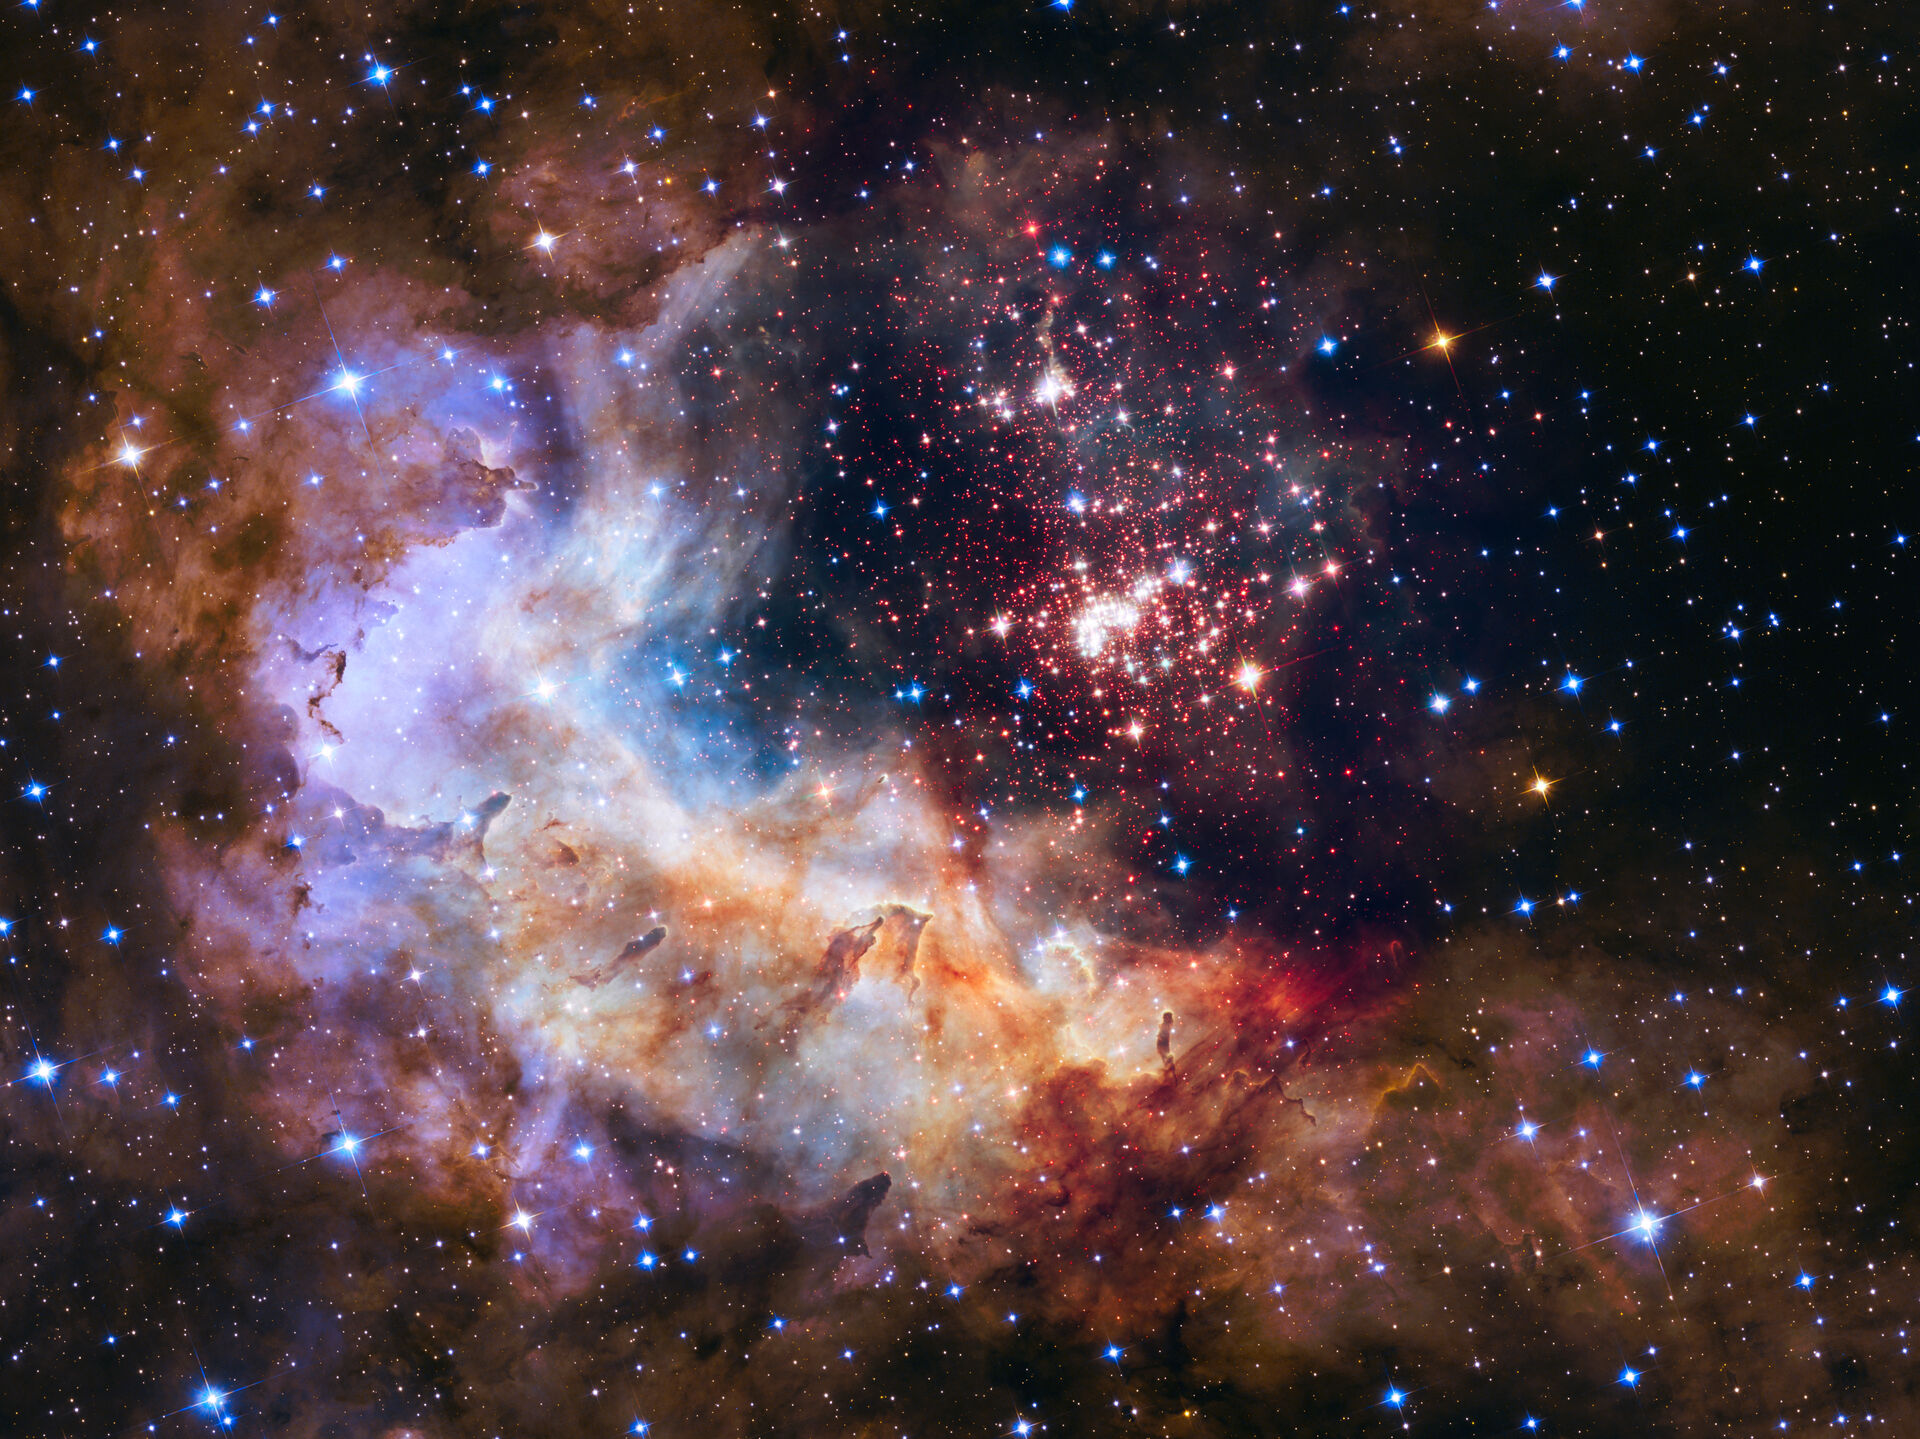 Image of hot, bright stars next to the star-forming region RCW 49.